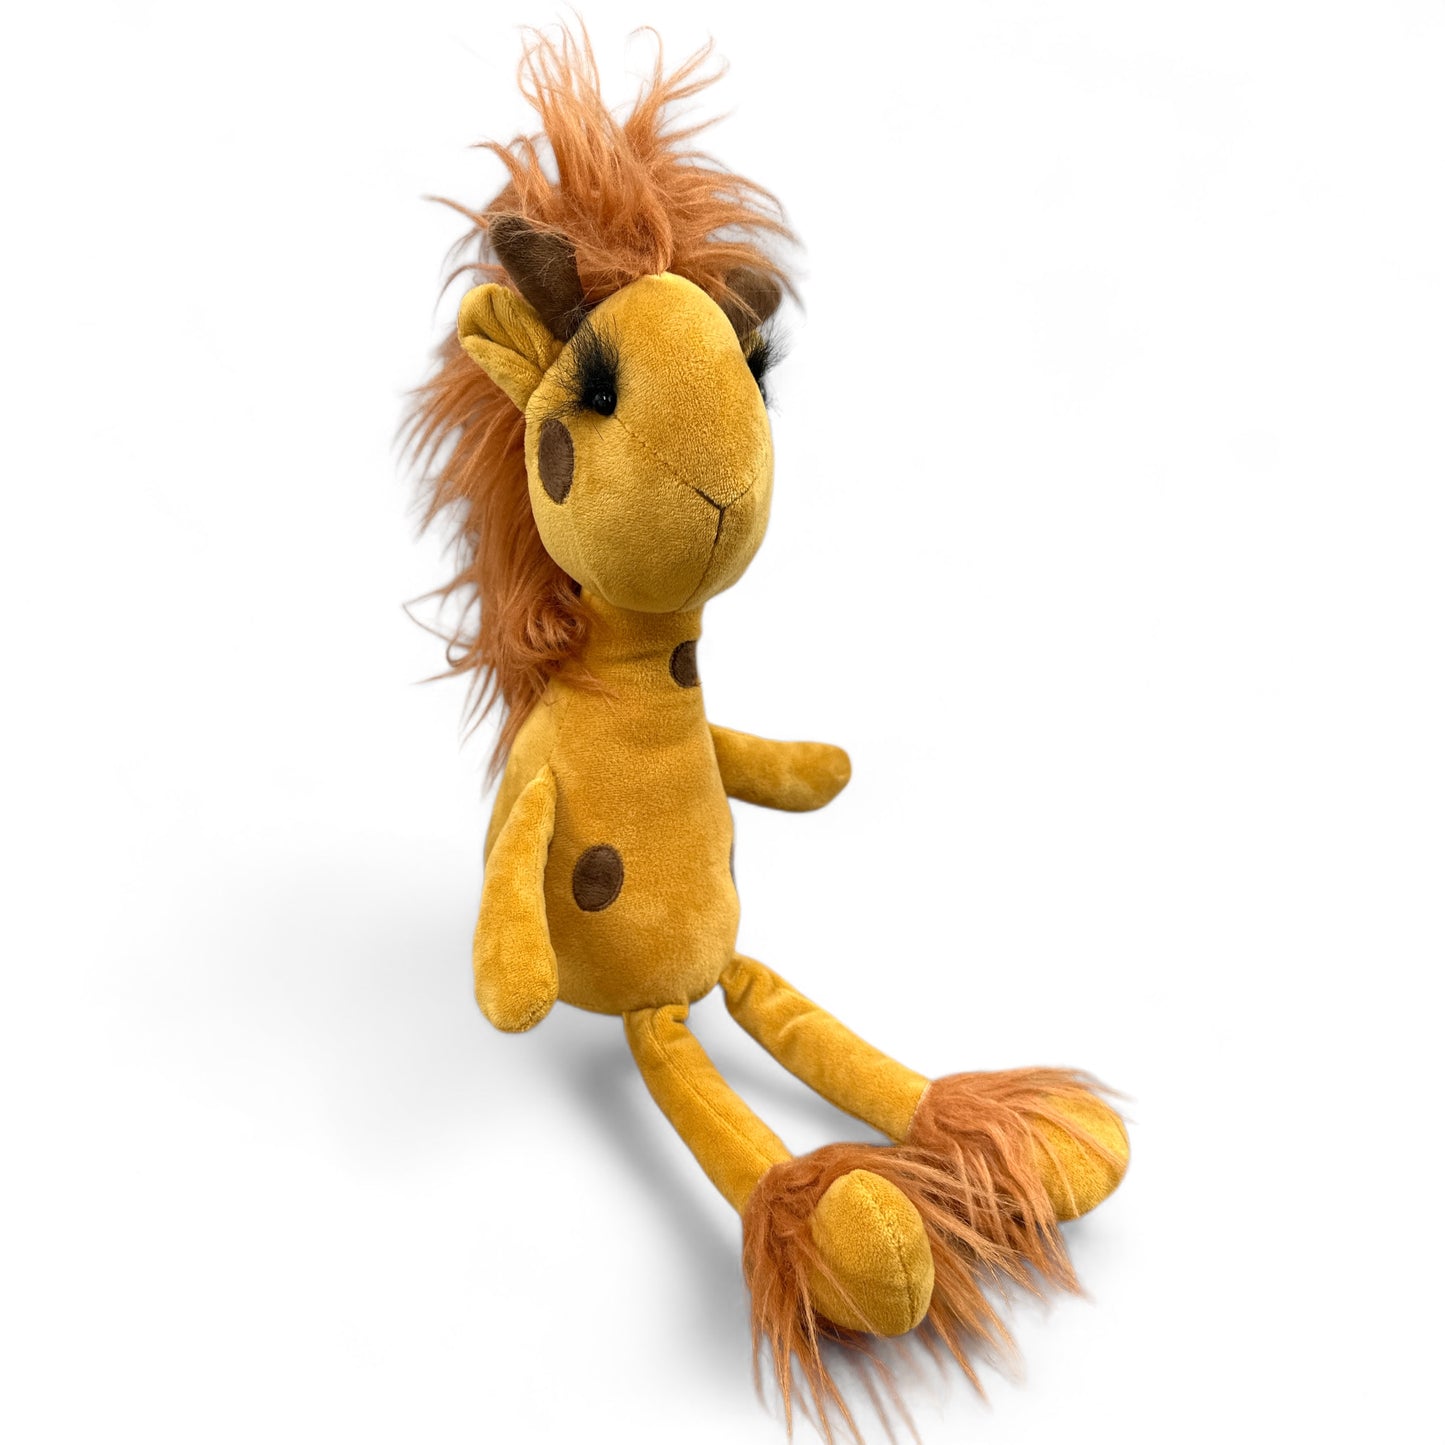 17" Weighted Giraffe with Fluffy Hair and Long Lashes